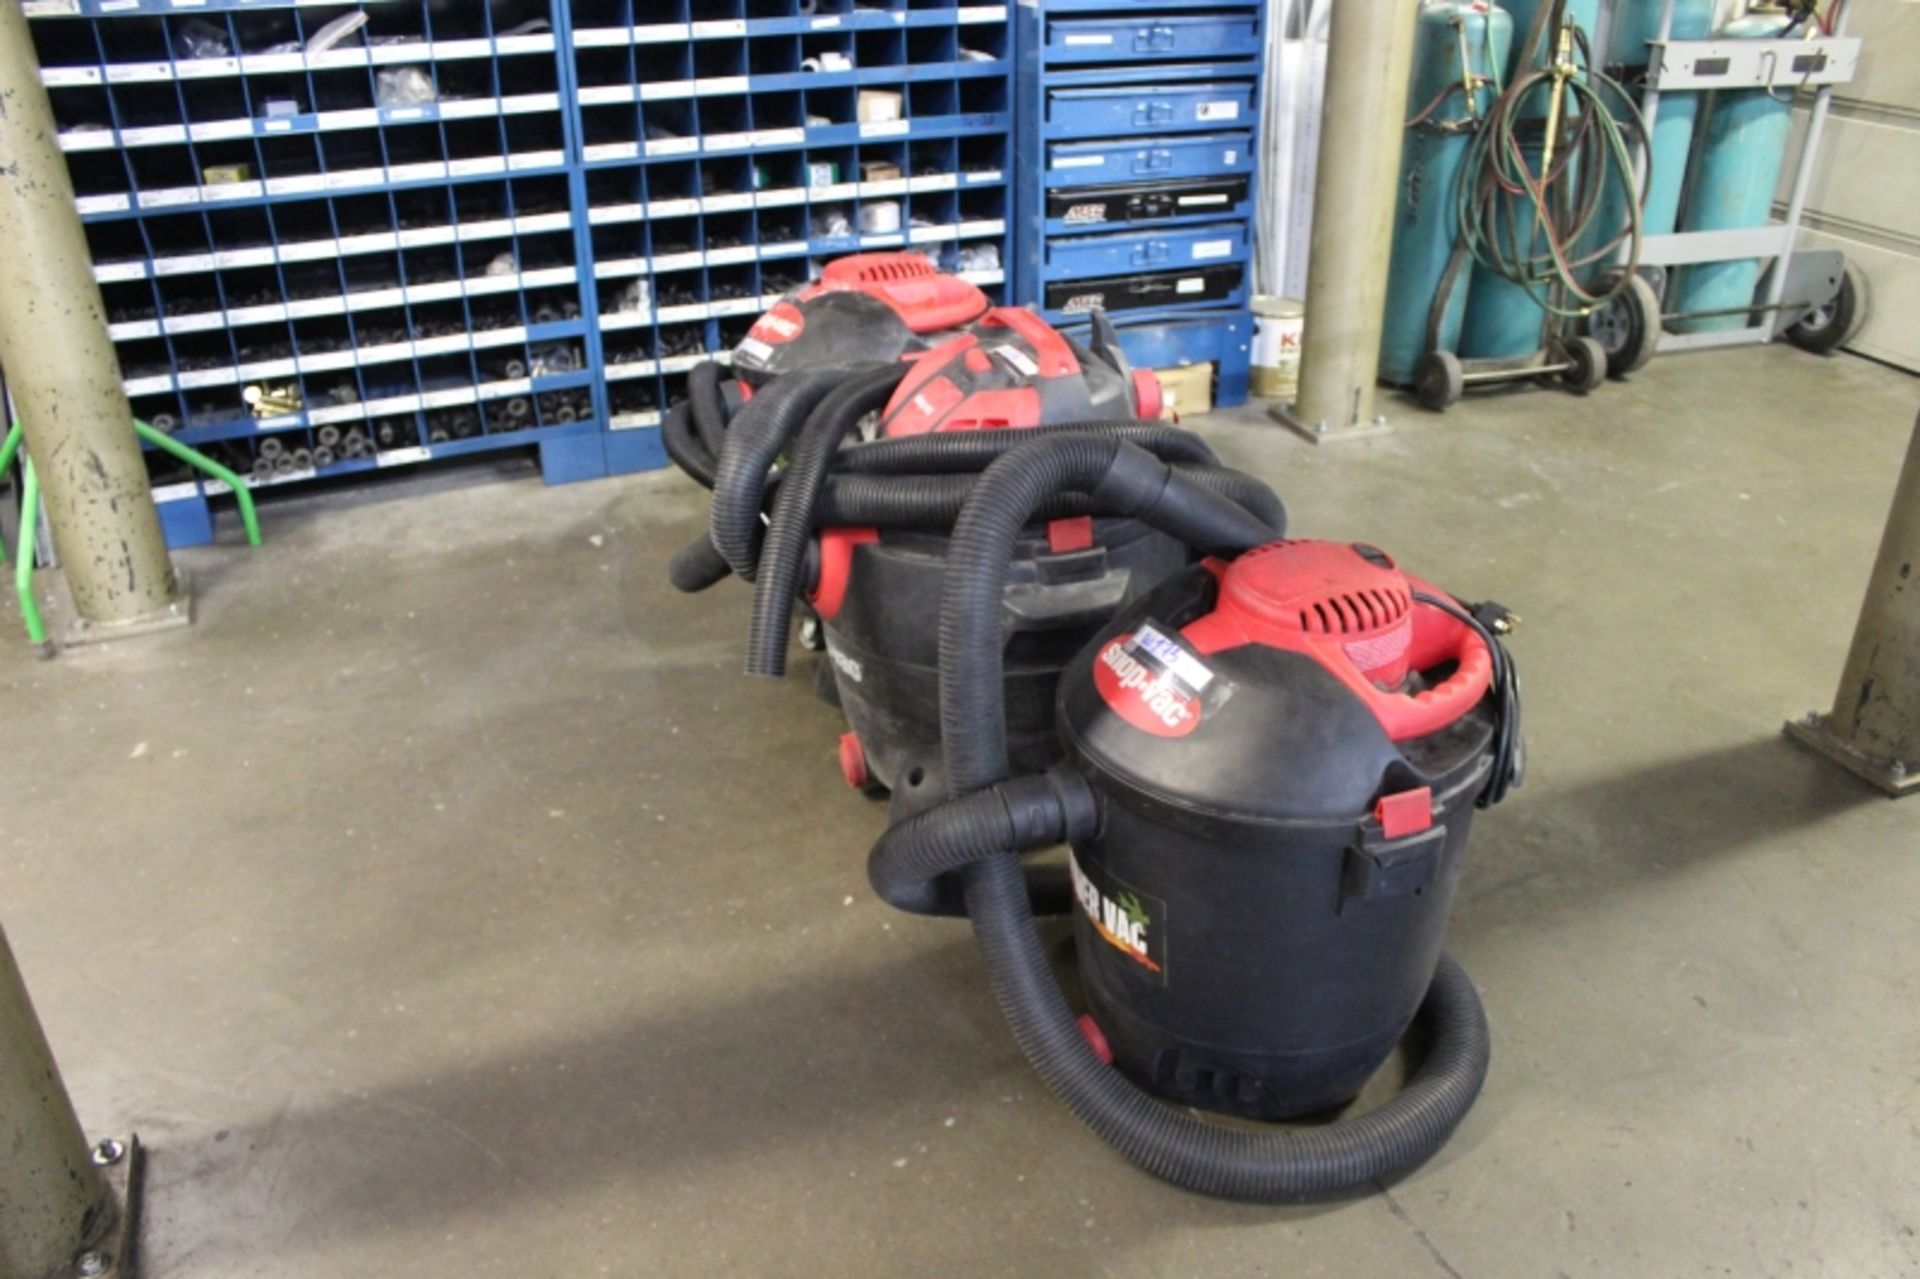 Shop Vacuums - Image 3 of 3